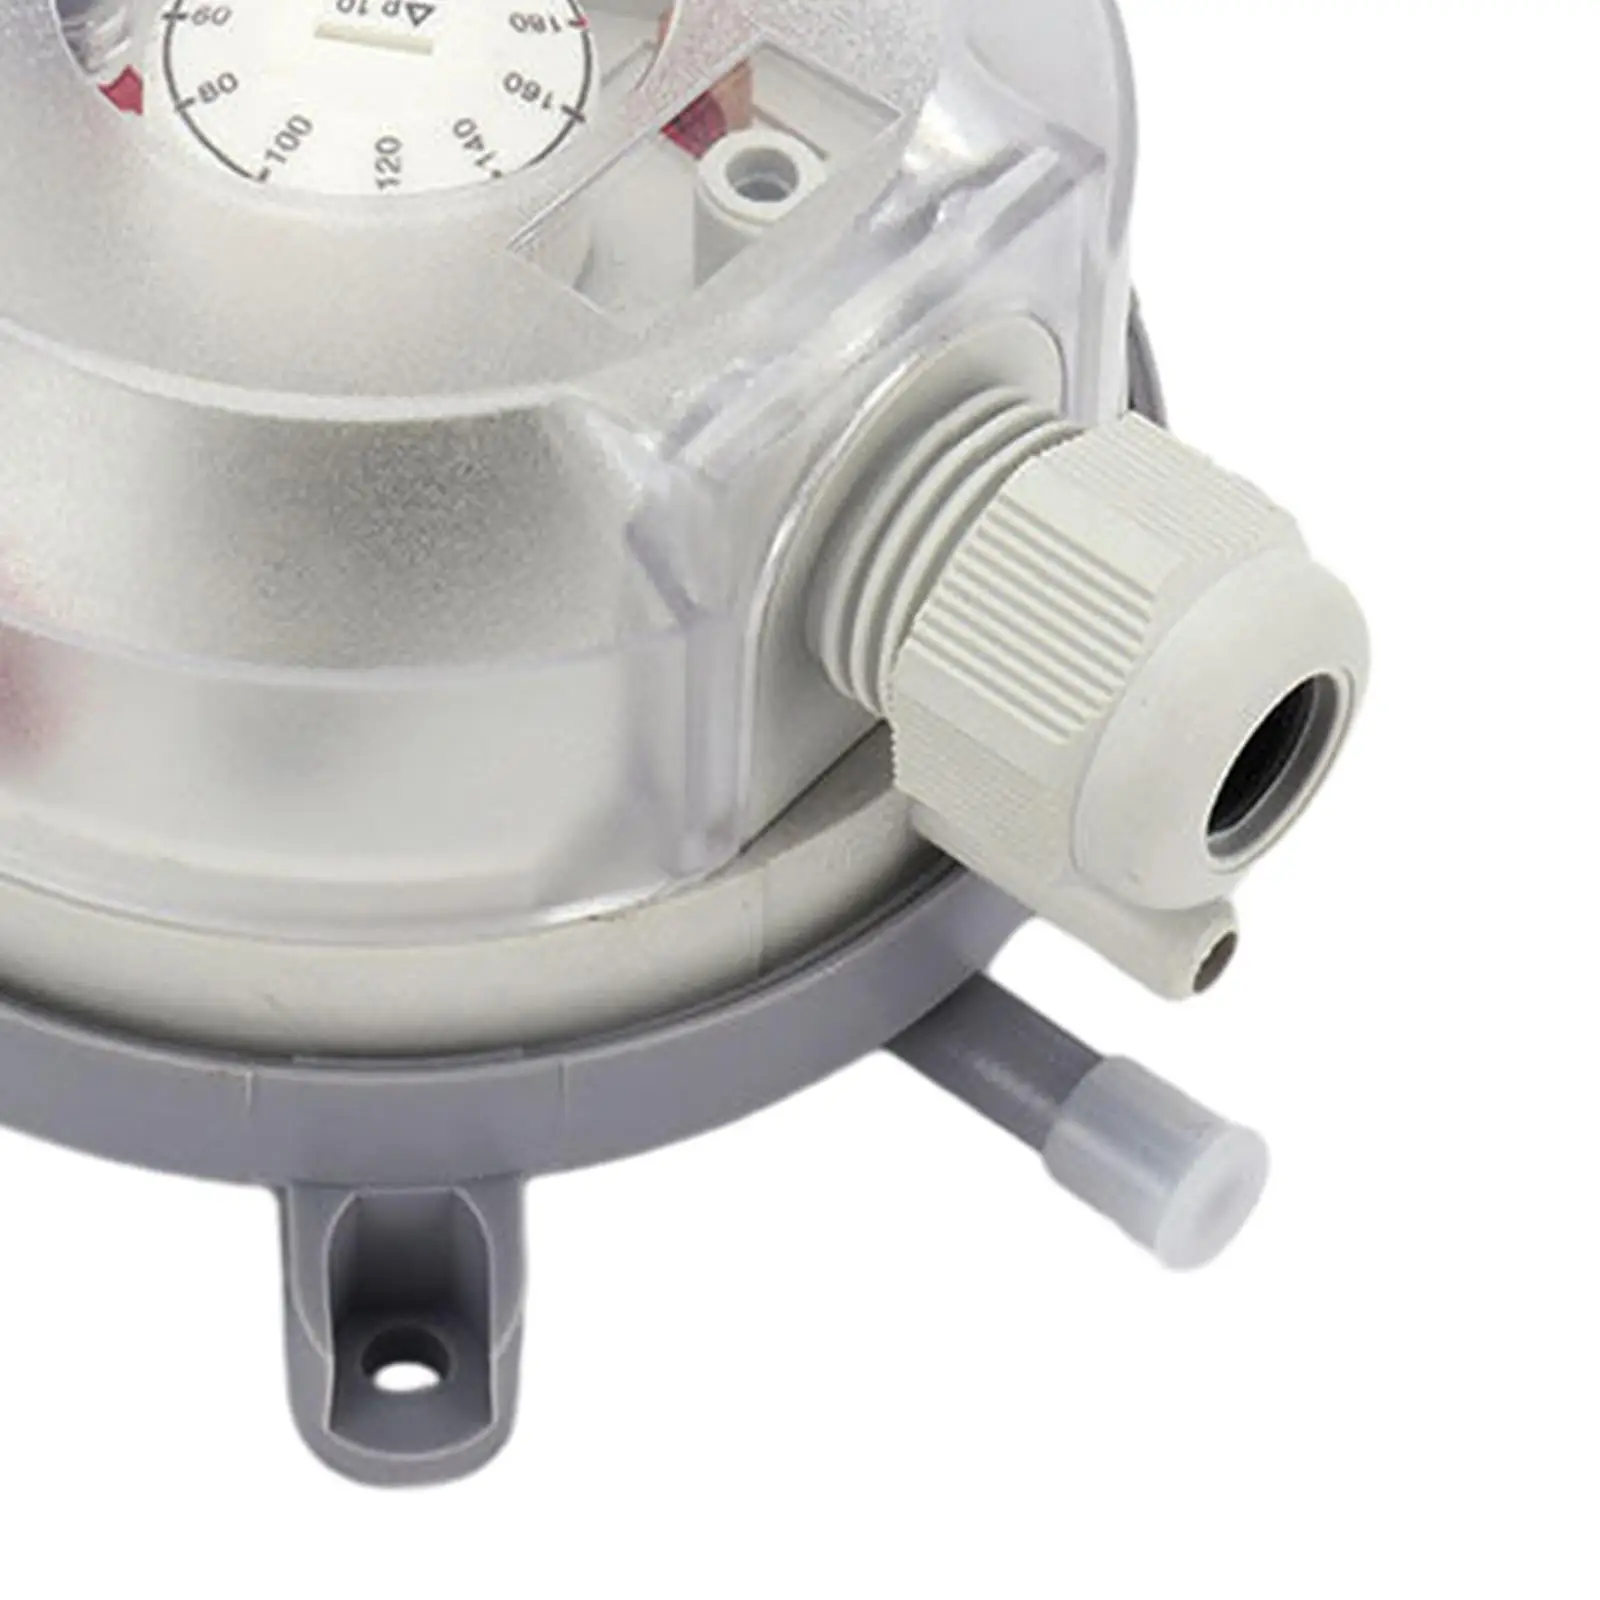 Differential Pressure Switch Dustproof Adjustable Mechanical Spdt for Environmental Protection Medical Pharmaceuticals Aerospace